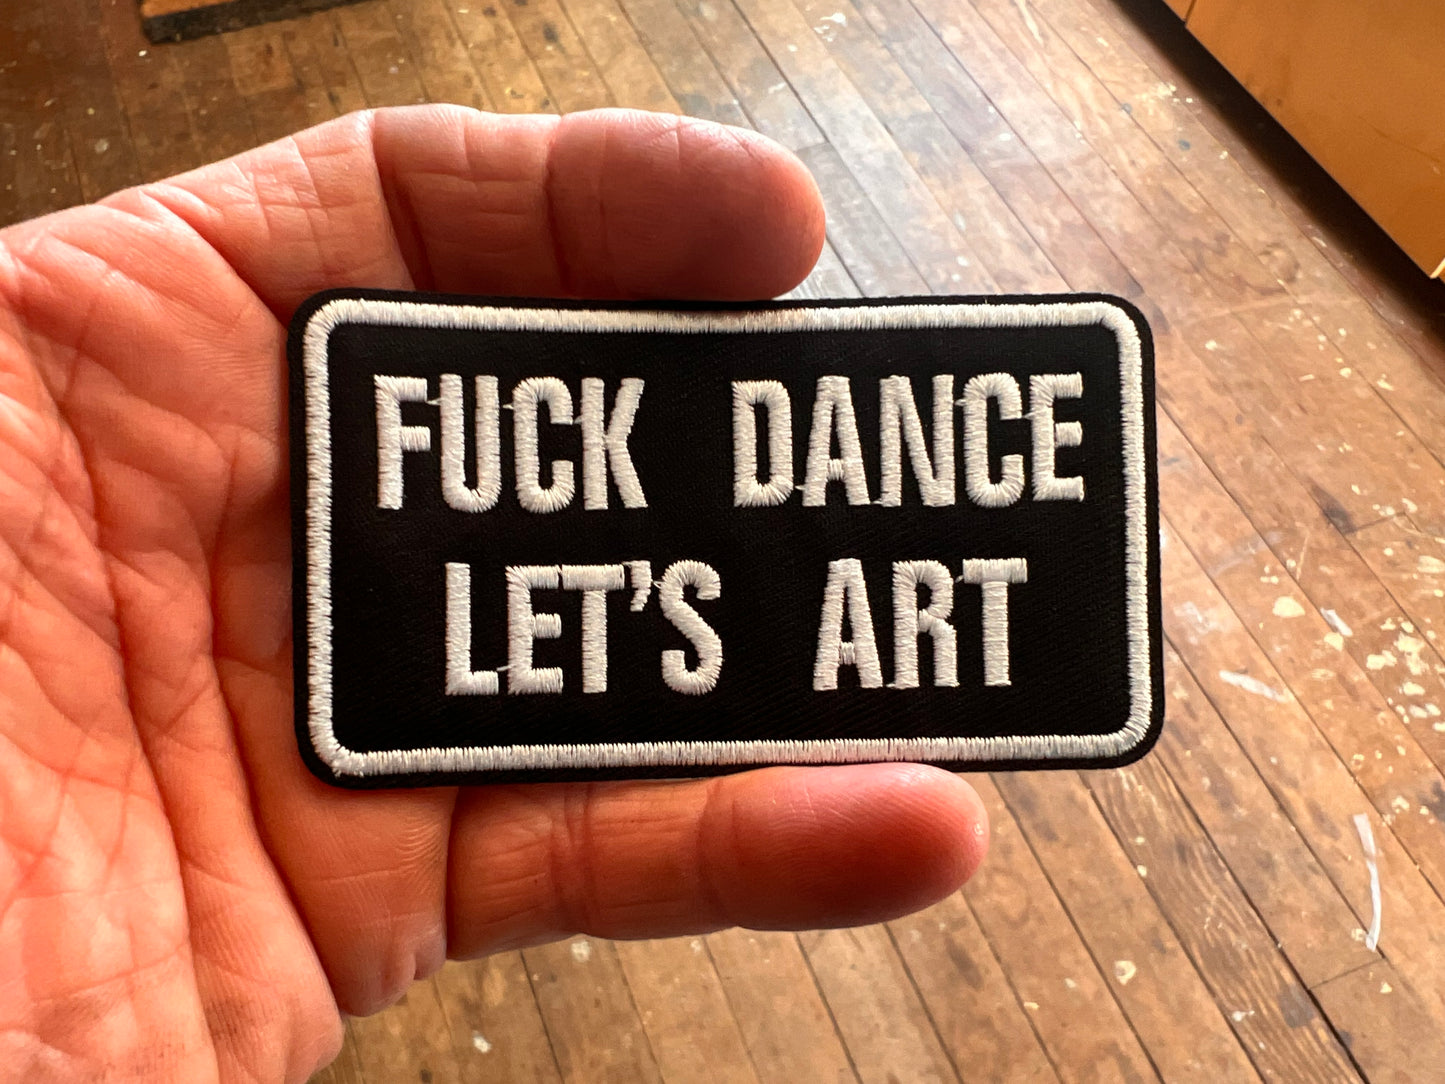 ‘FUCK DANCE LET’S ART’ embroidered patch